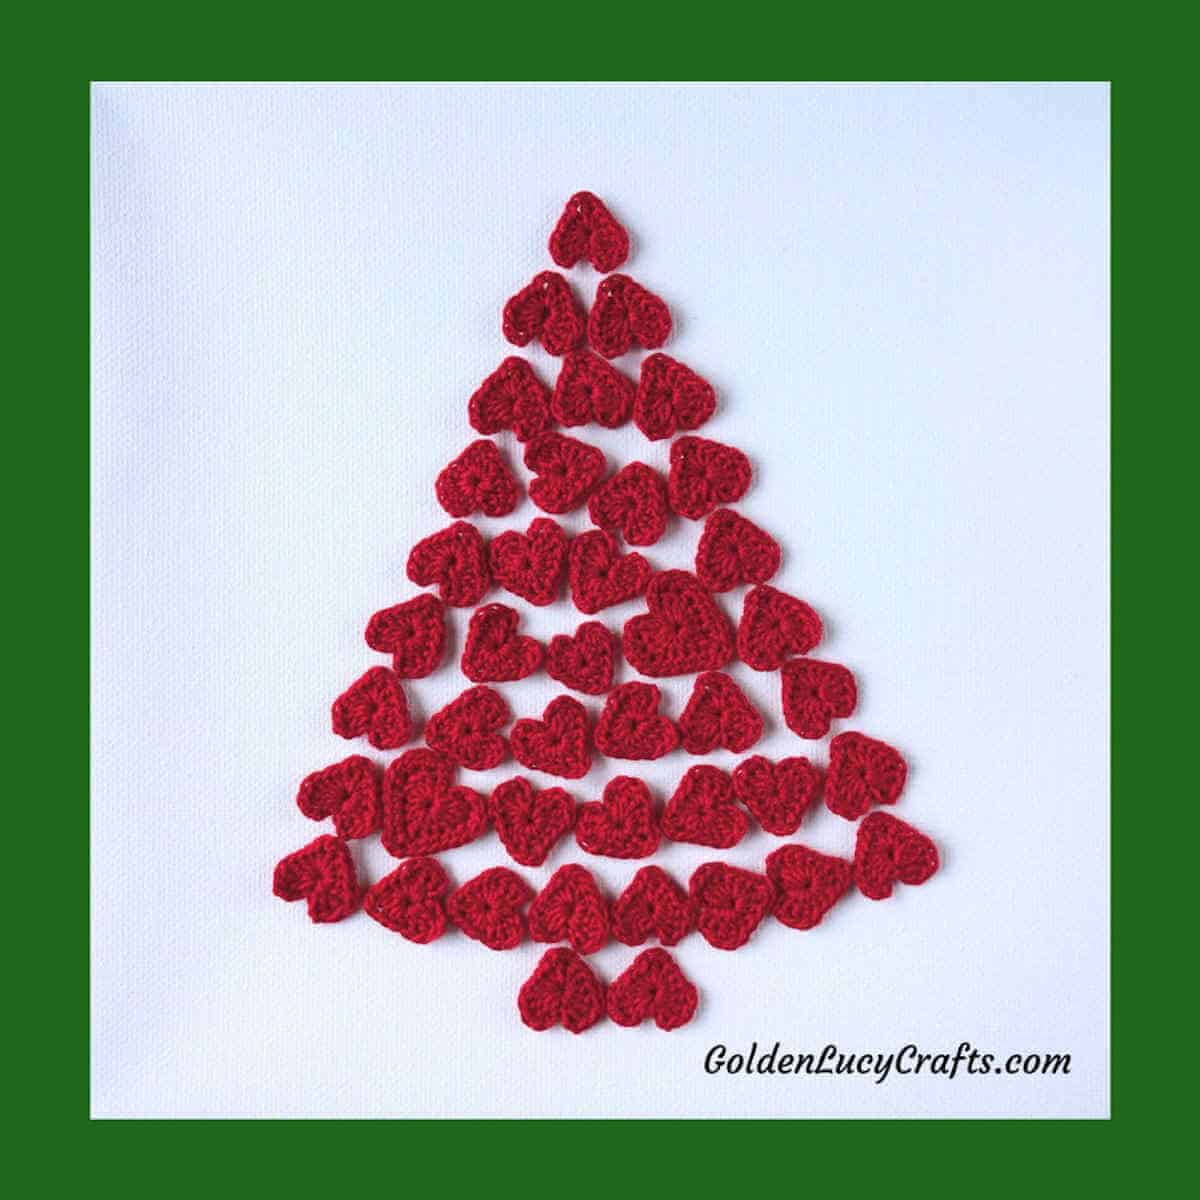 Christmas tree made from small crocheted red hearts.